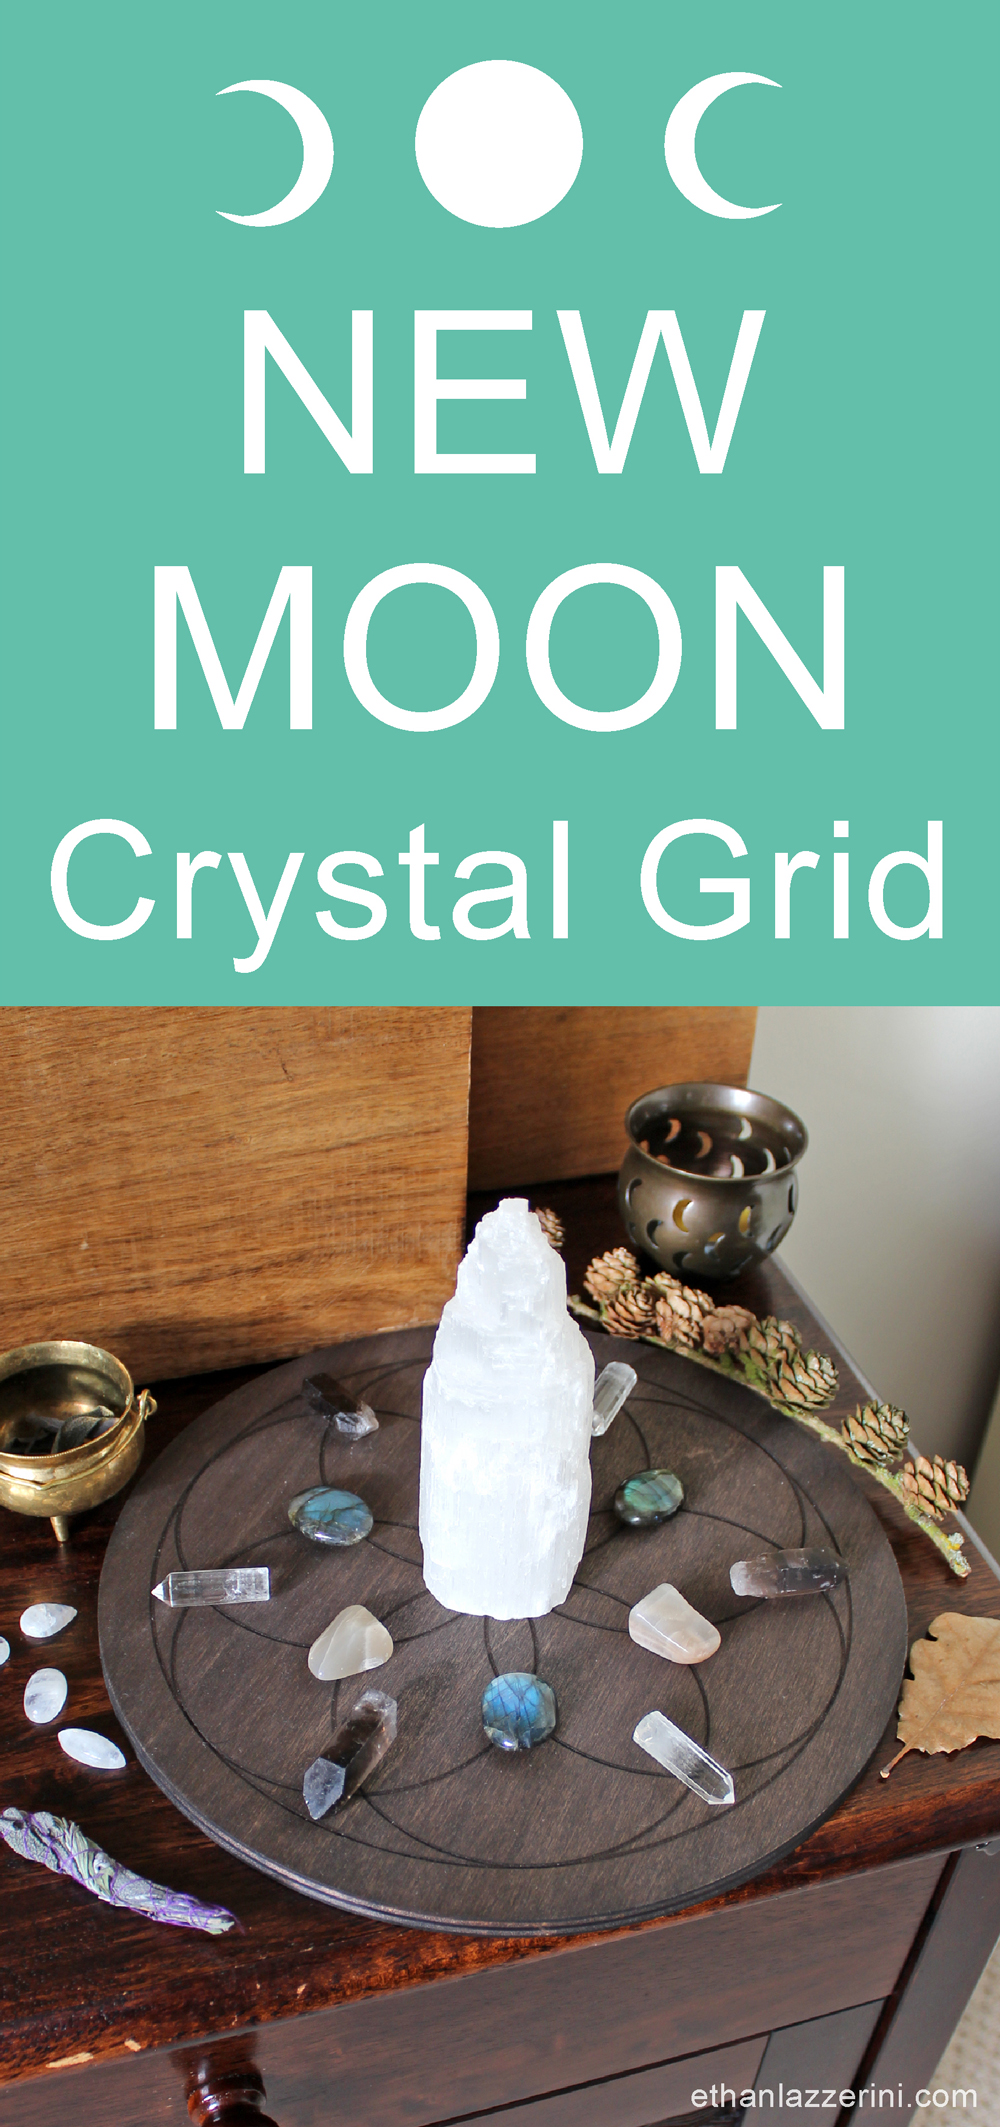 New moon crystal grid (save to Pinterest)